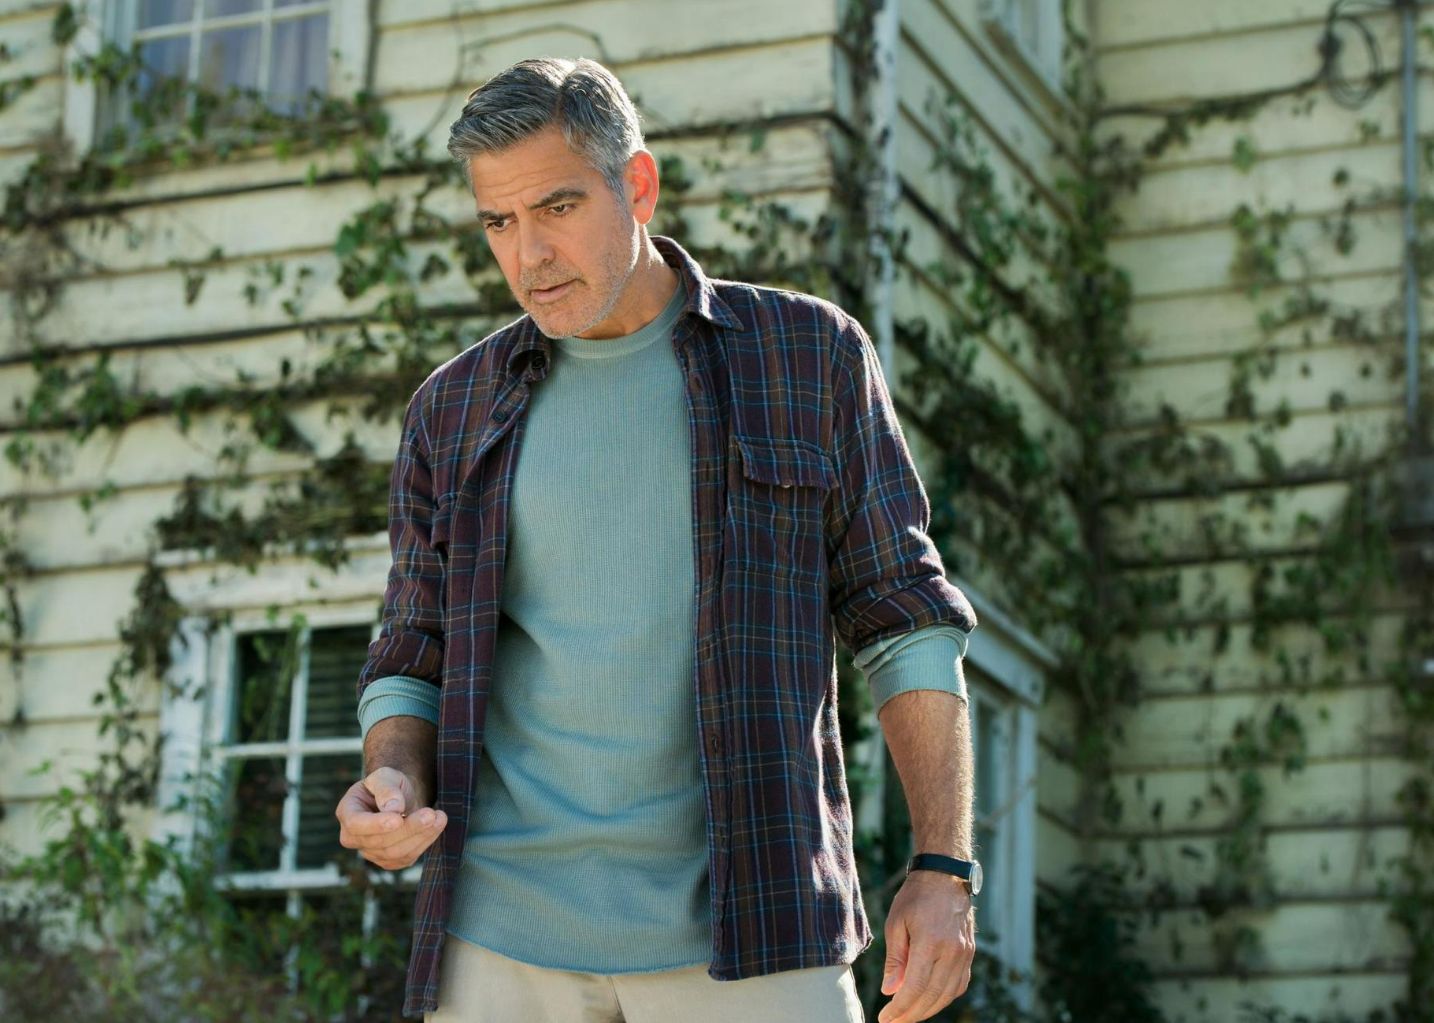 George Clooney in a scene from "Tomorrowland" 